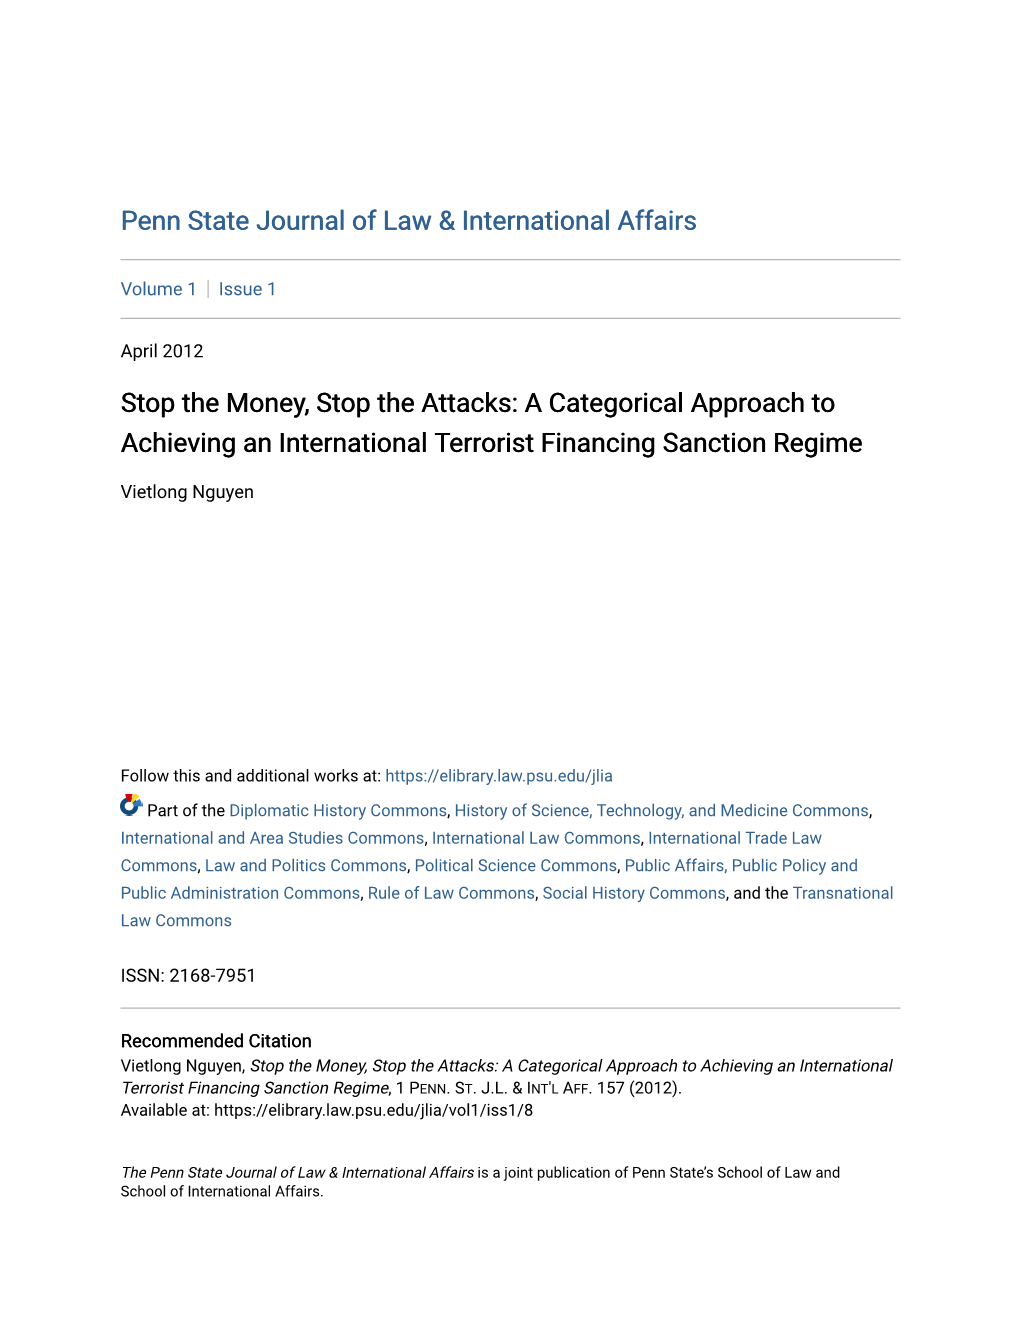 Stop the Money, Stop the Attacks: a Categorical Approach to Achieving an International Terrorist Financing Sanction Regime